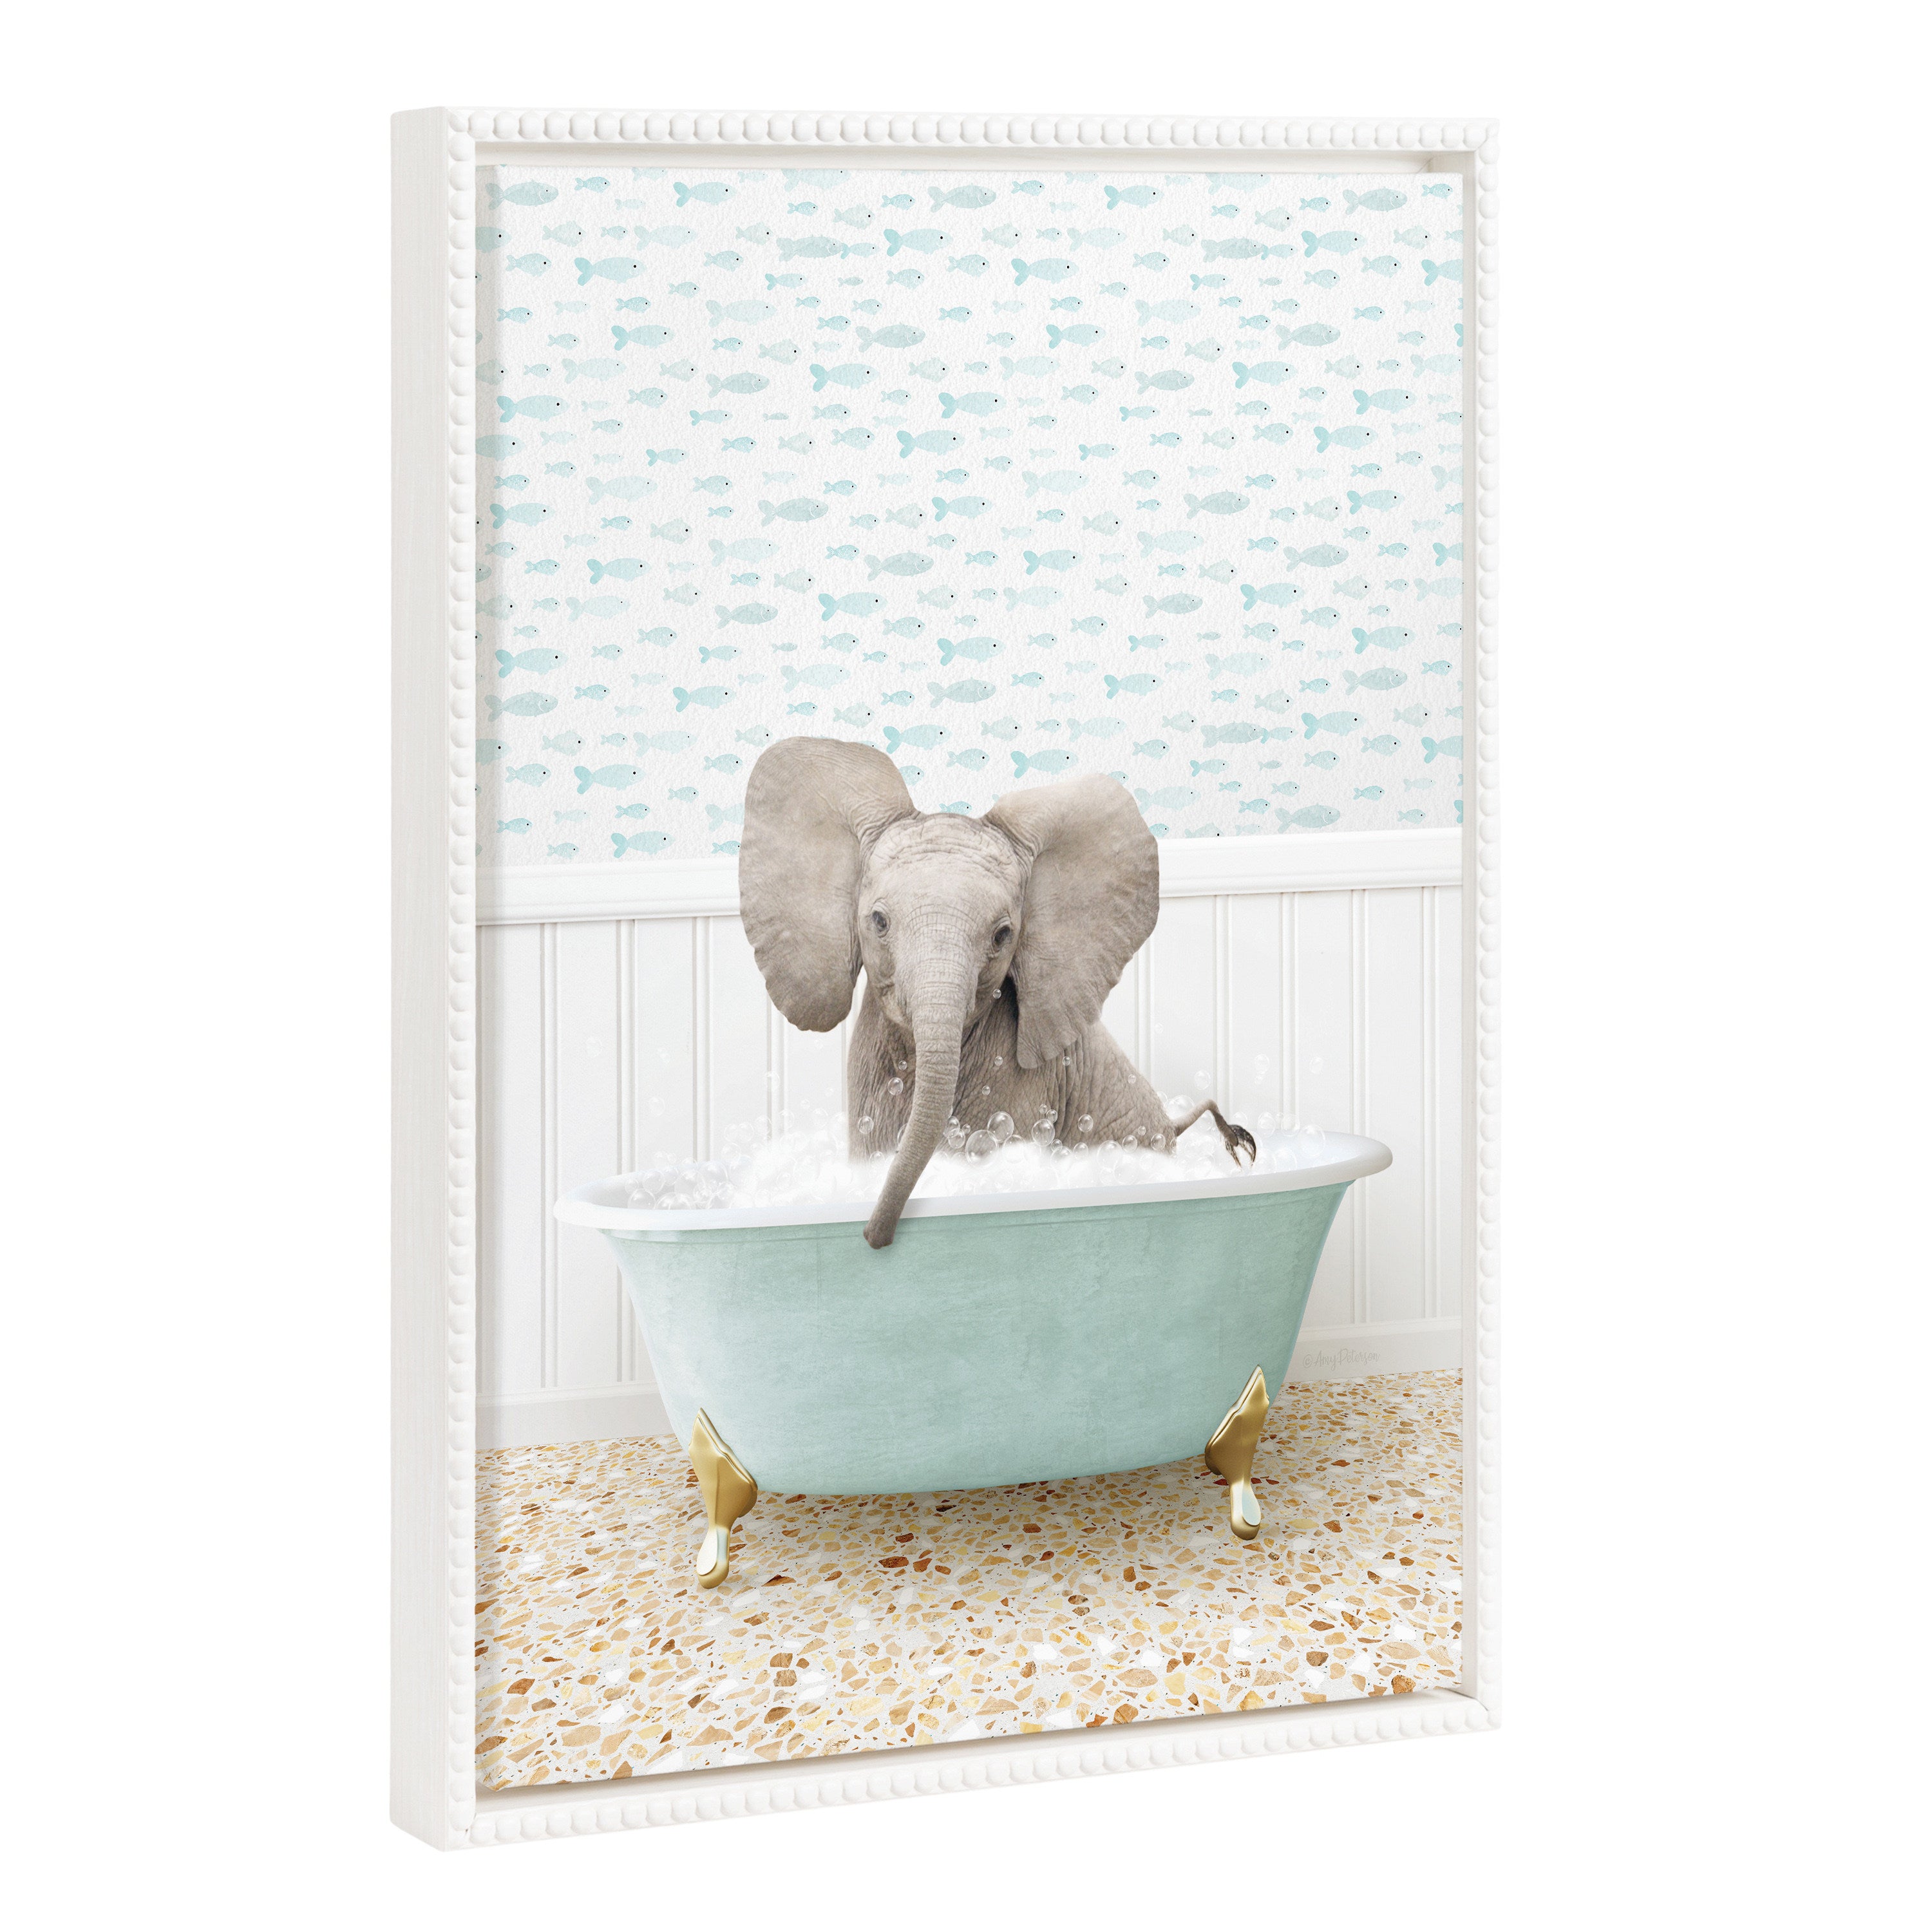 Kate and Laurel Sylvie Beaded Baby Elephant in Little Fish Bath